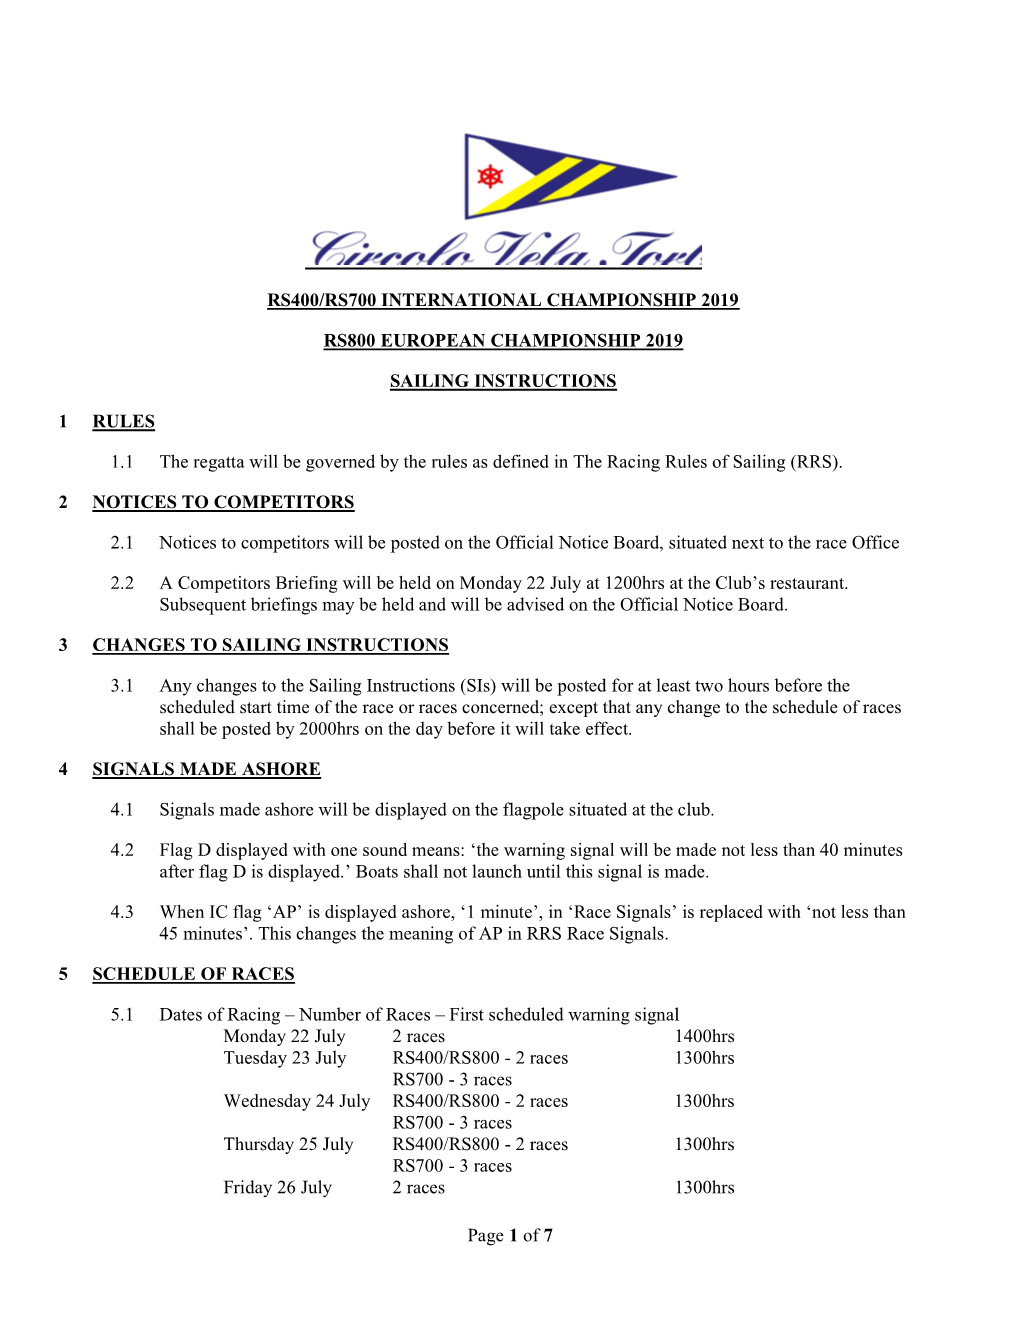 Page 1 of 7 RS400/RS700 INTERNATIONAL CHAMPIONSHIP 2019 RS800 EUROPEAN CHAMPIONSHIP 2019 SAILING INSTRUCTIONS 1 RULES 1.1 the Re